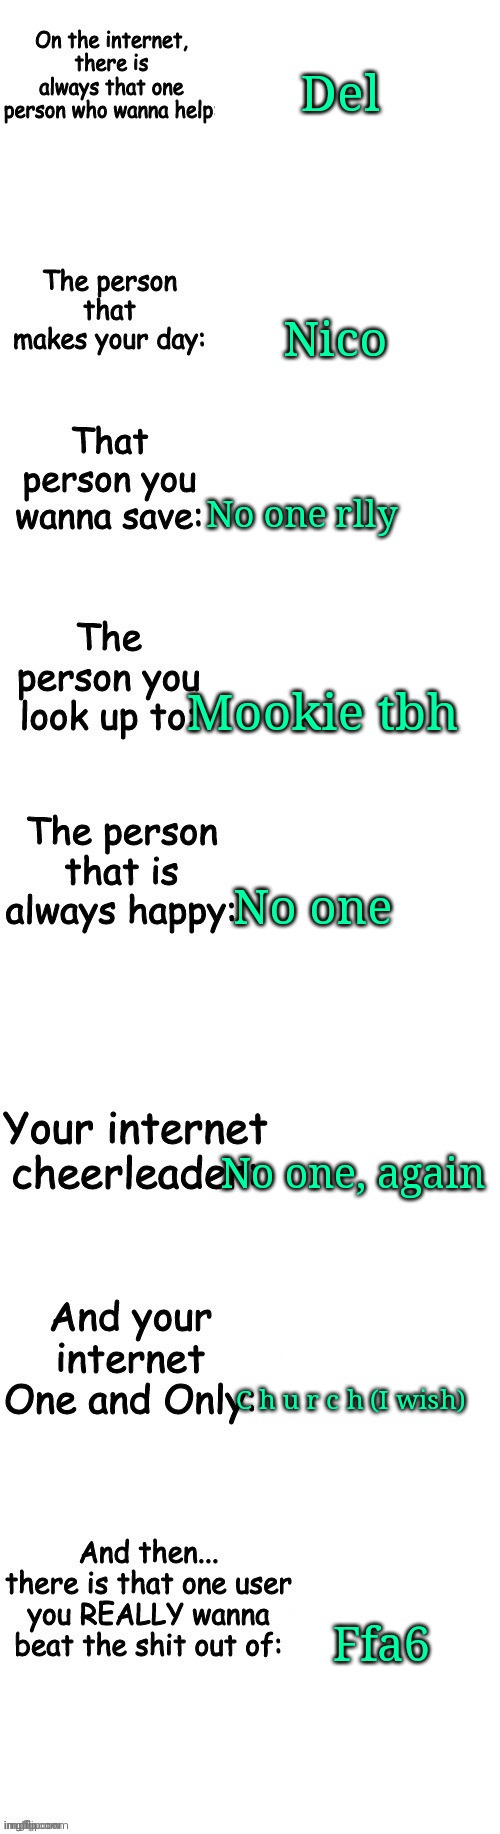 People on the internet | Del; Nico; No one rlly; Mookie tbh; No one; No one, again; C h u r c h (I wish); Ffa6 | image tagged in people on the internet | made w/ Imgflip meme maker